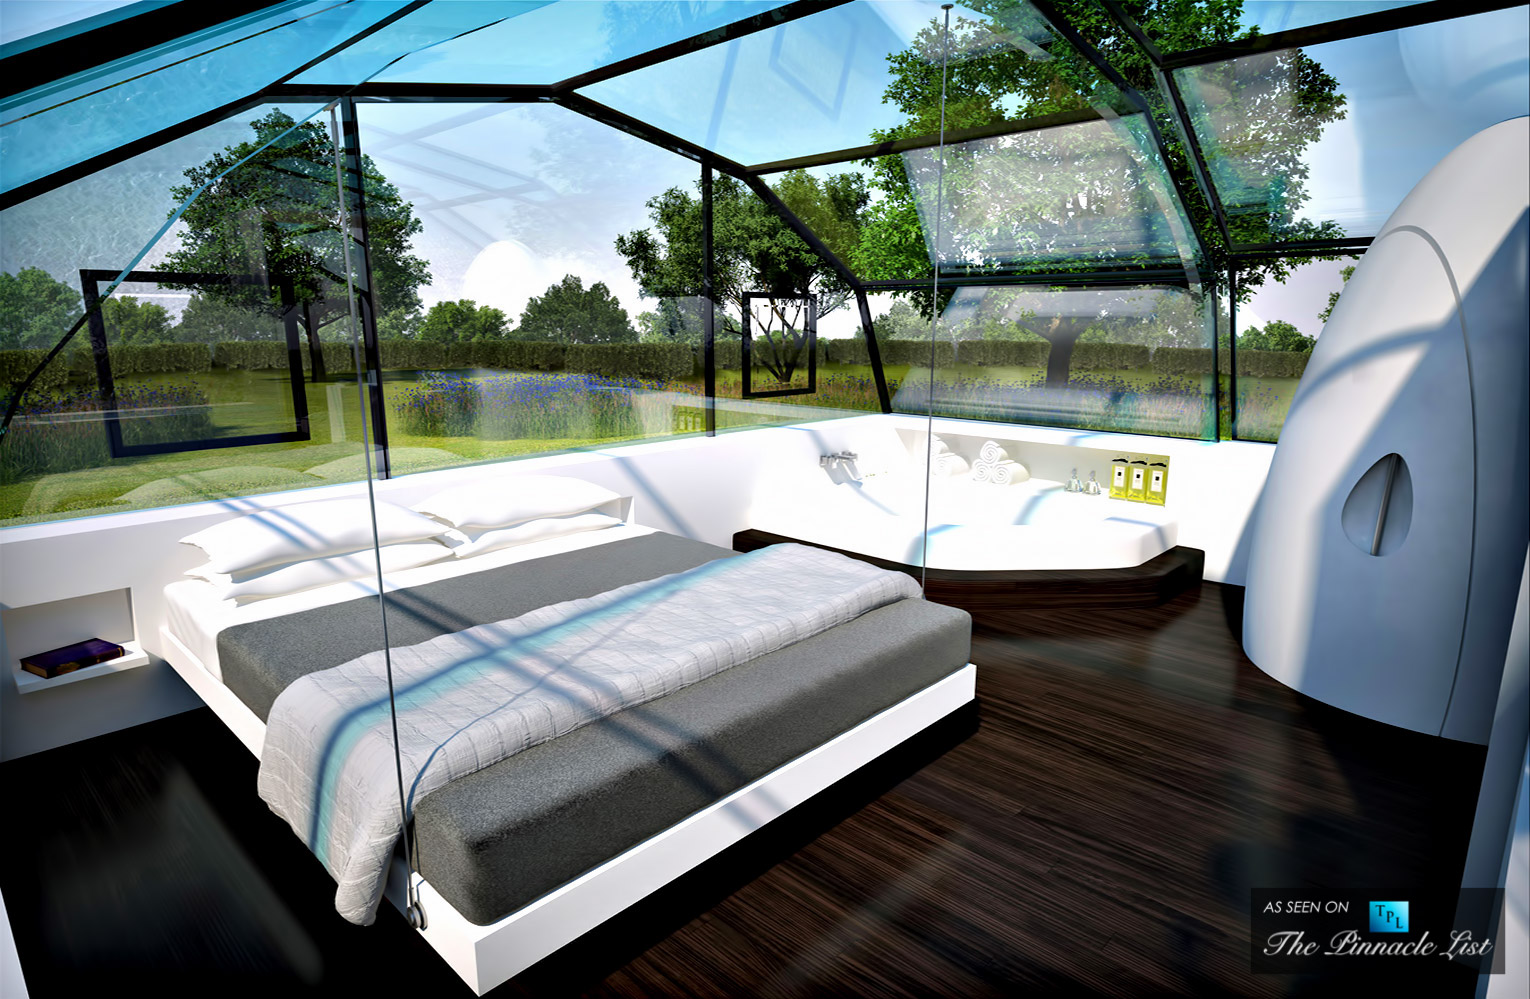 The Photon Space – Imagining an All-Glass Modular Home, Controllable with an iPhone